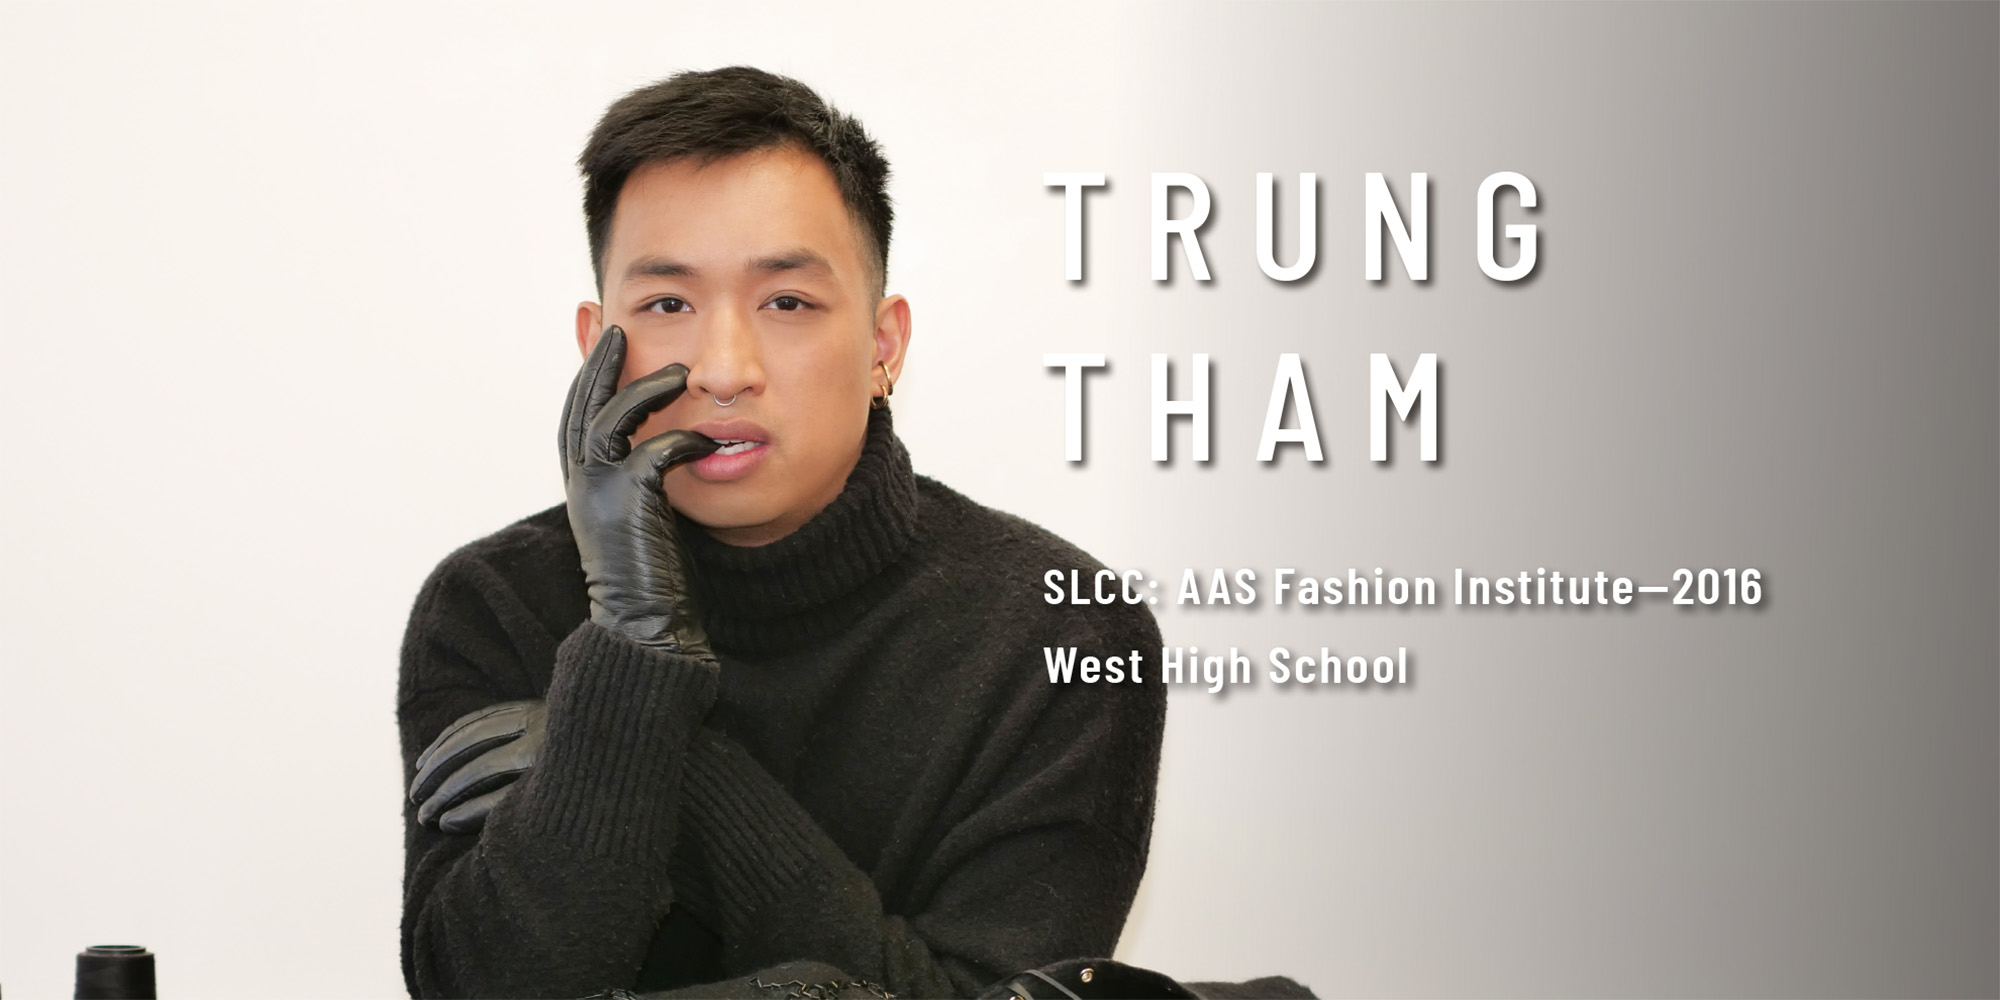 Trung Tham, SLCC AAS Fashion Institute in 2016, From West High School